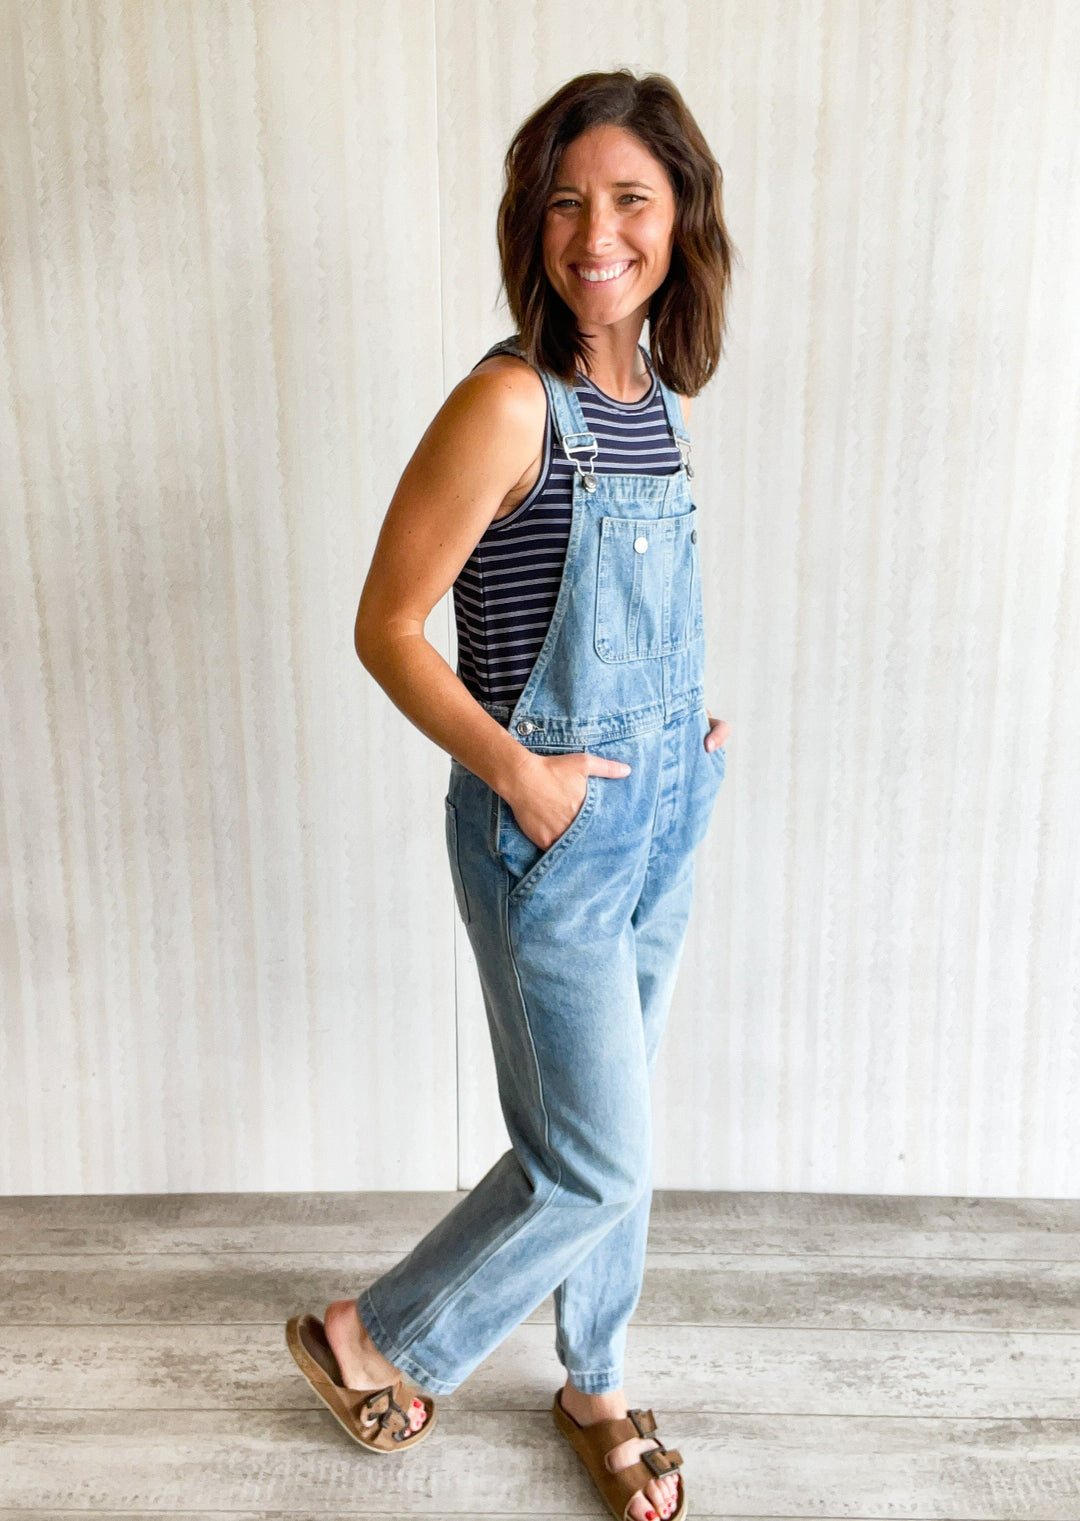 Women's Denim Overalls with navy and white striped tank top.